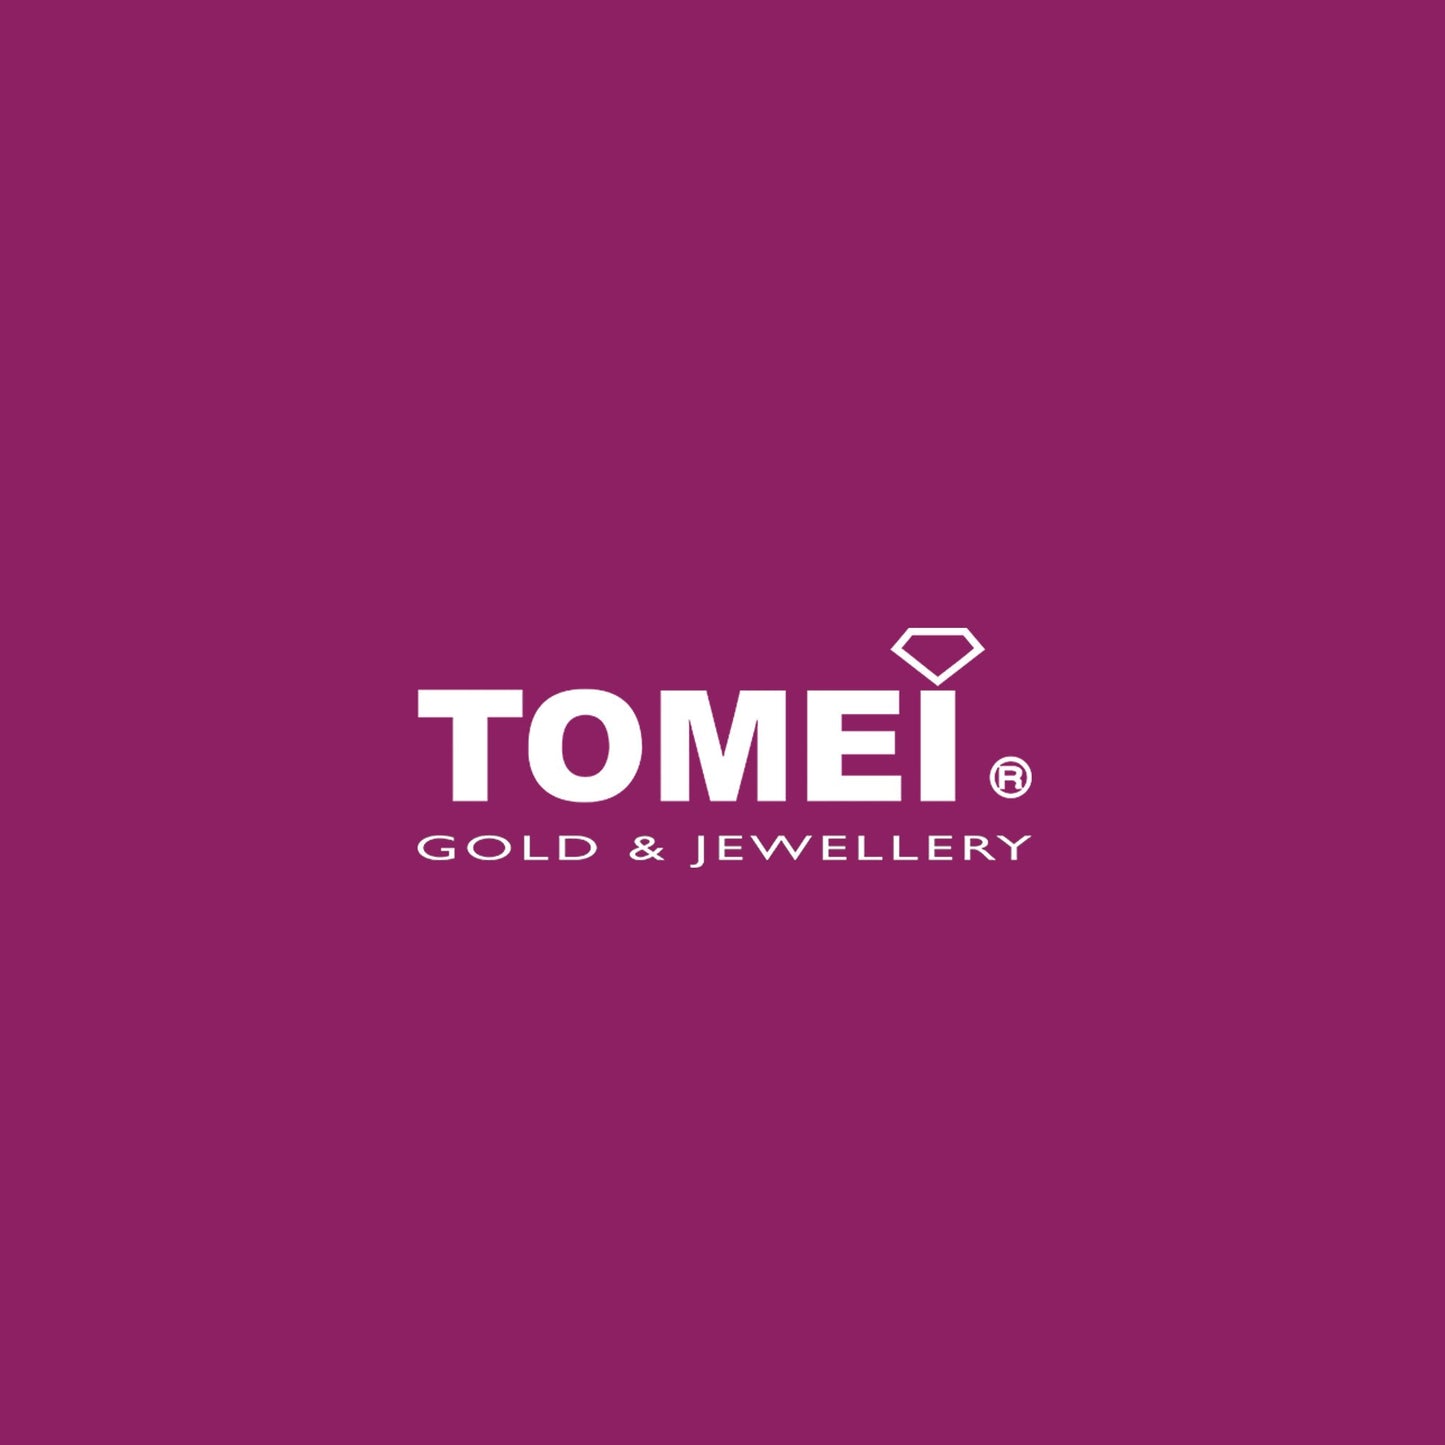 TOMEI Rouge Collection, Lovely Hulu Necklace Rose Gold 750